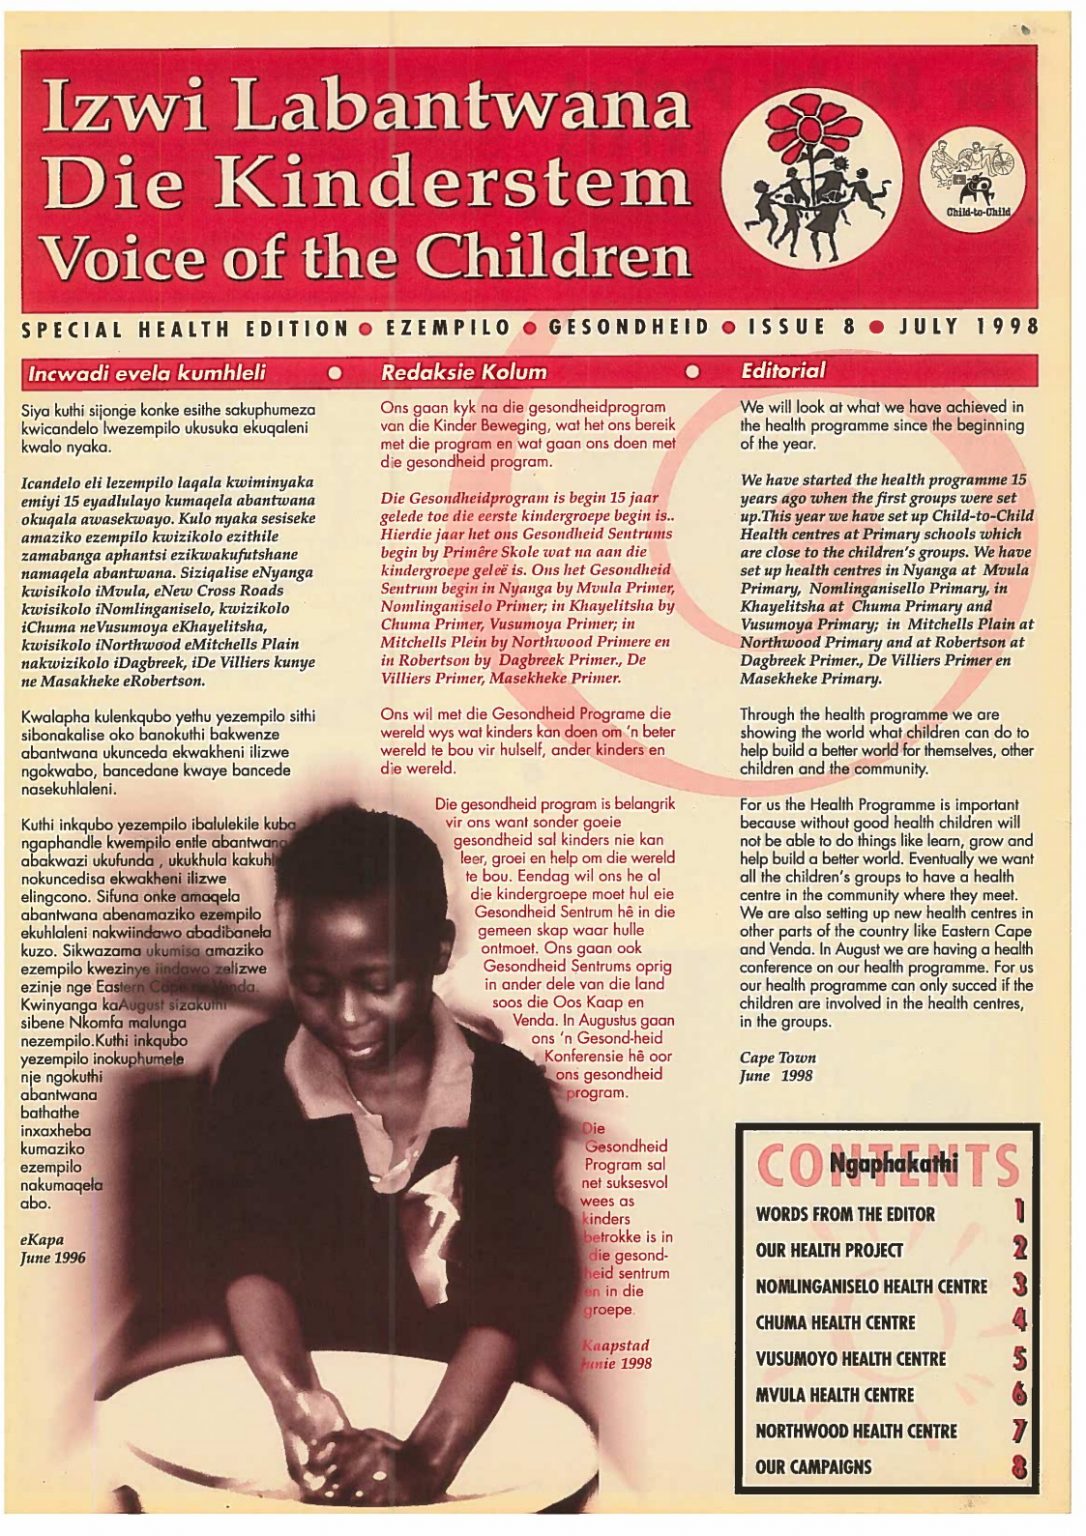 Page one of Voice of the Children, Special Health Edition, July 1998.